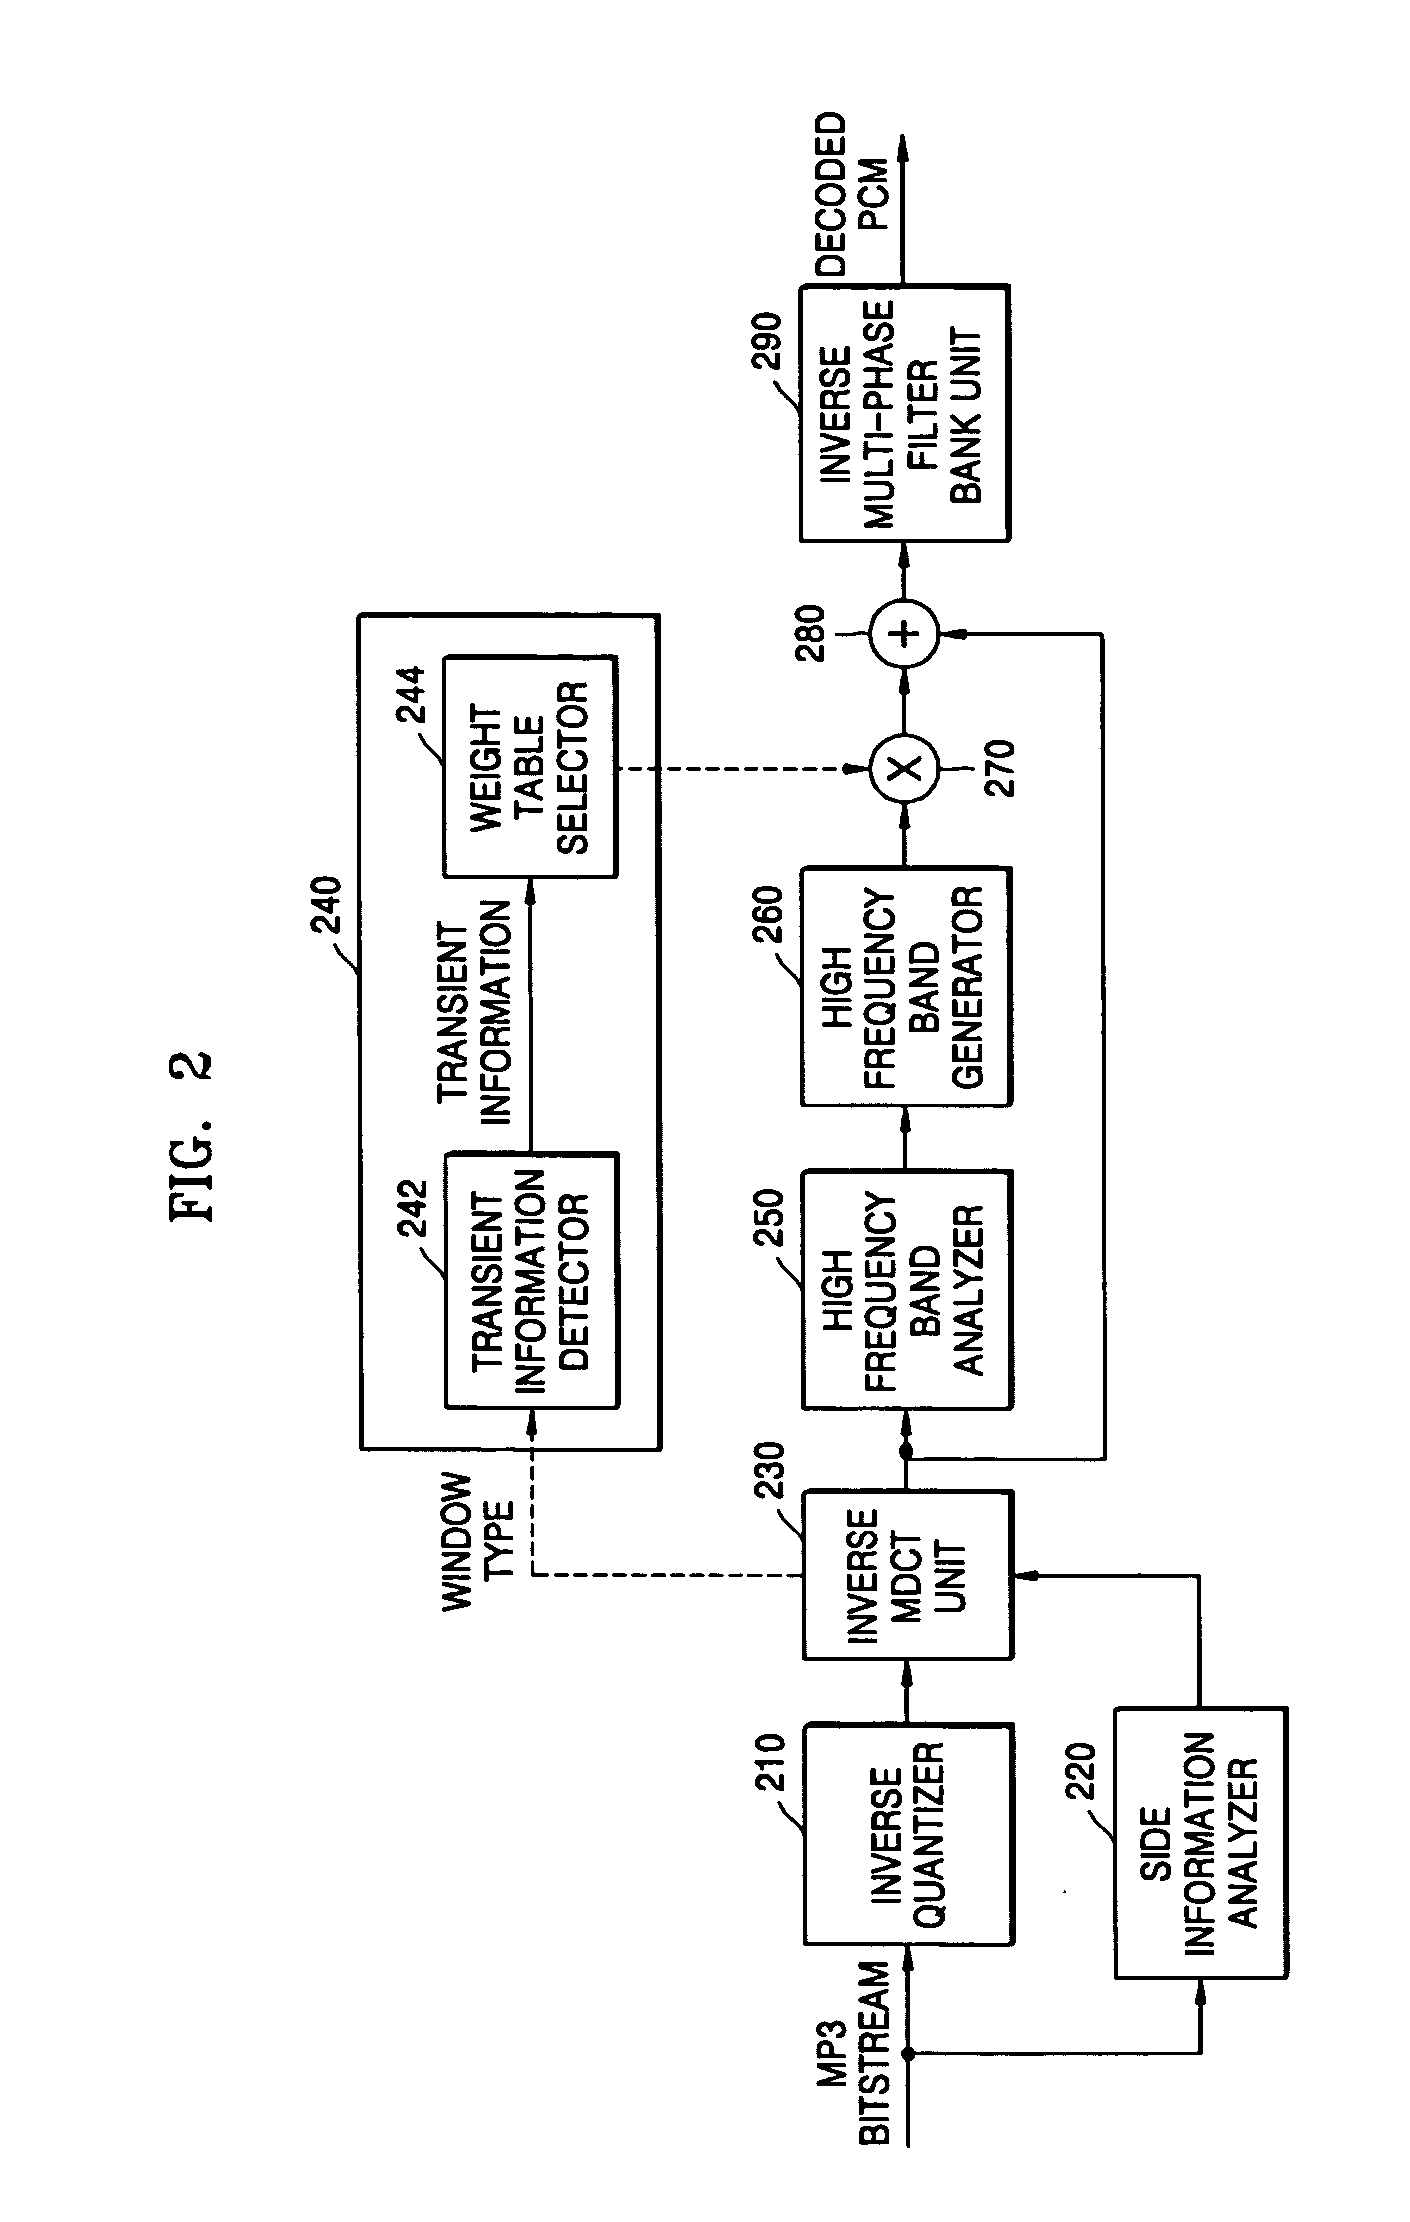 Method and apparatus to recover a high frequency component of audio data